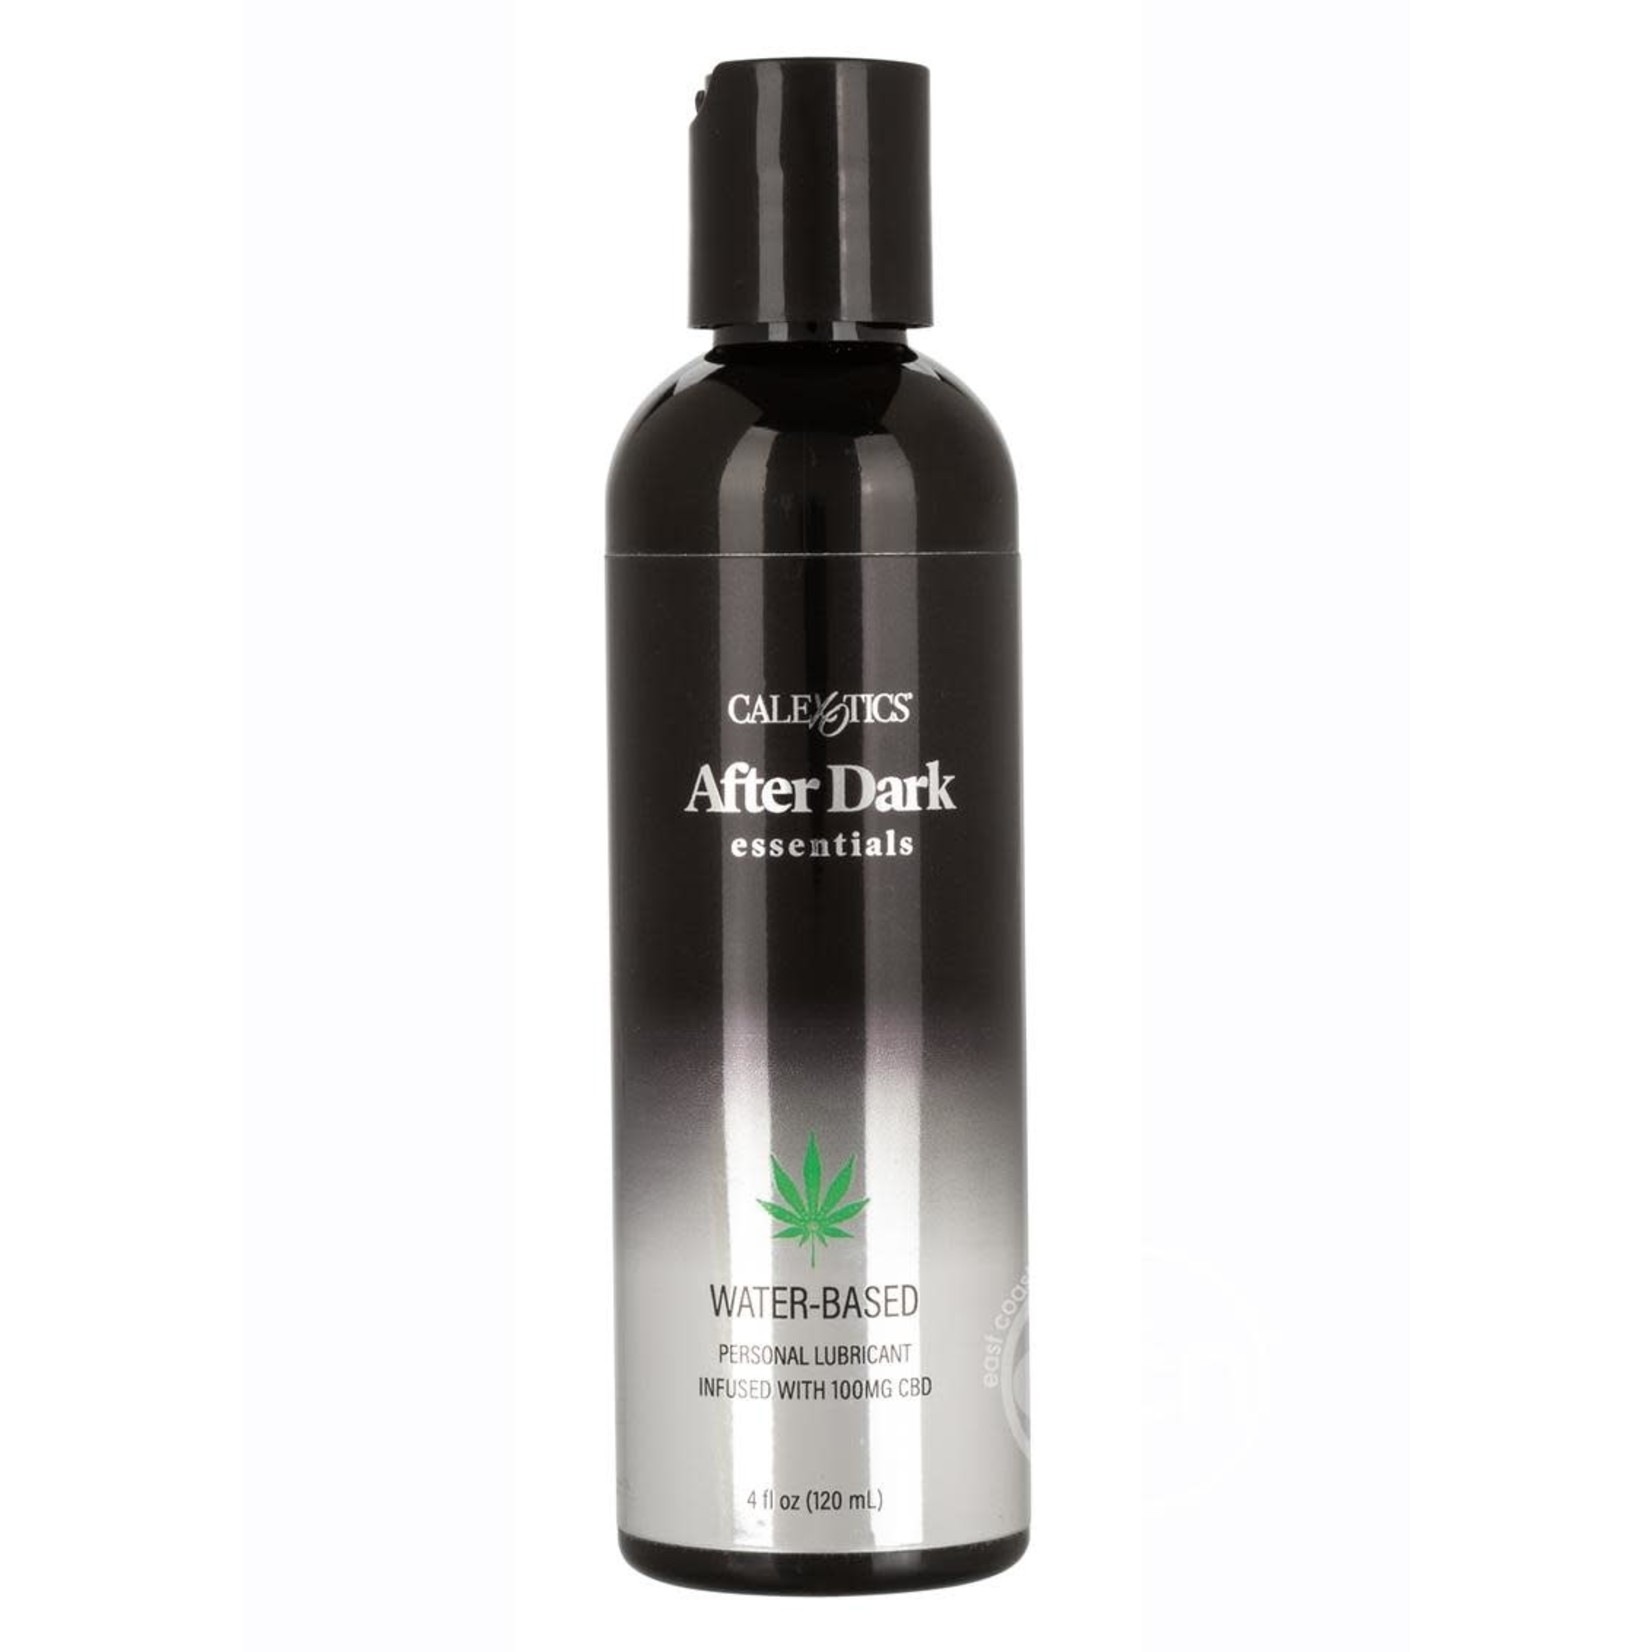 After Dark Essentials Water-Based Personal Lubricant Infused with CBD 4oz